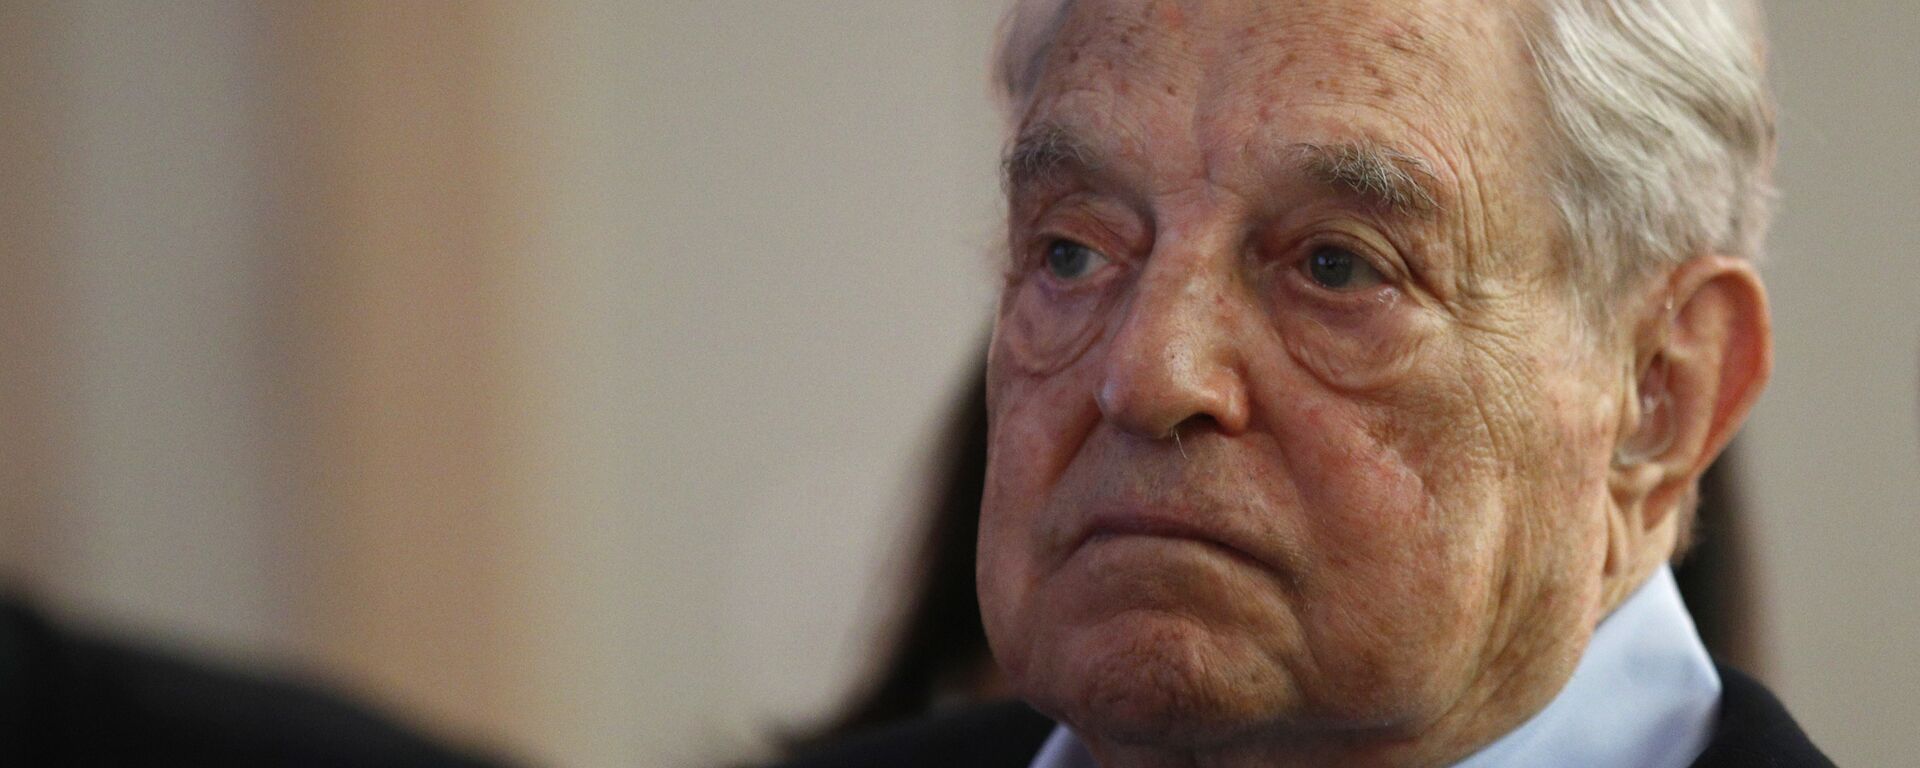 George Soros, Founder and Chairman of the Open Society Foundations listens to the conference after his speech entitled How to save the European Union as he attends the European Council On Foreign Relations Annual Council Meeting in Paris, Tuesday, May 29, 2018 - Sputnik International, 1920, 23.08.2022